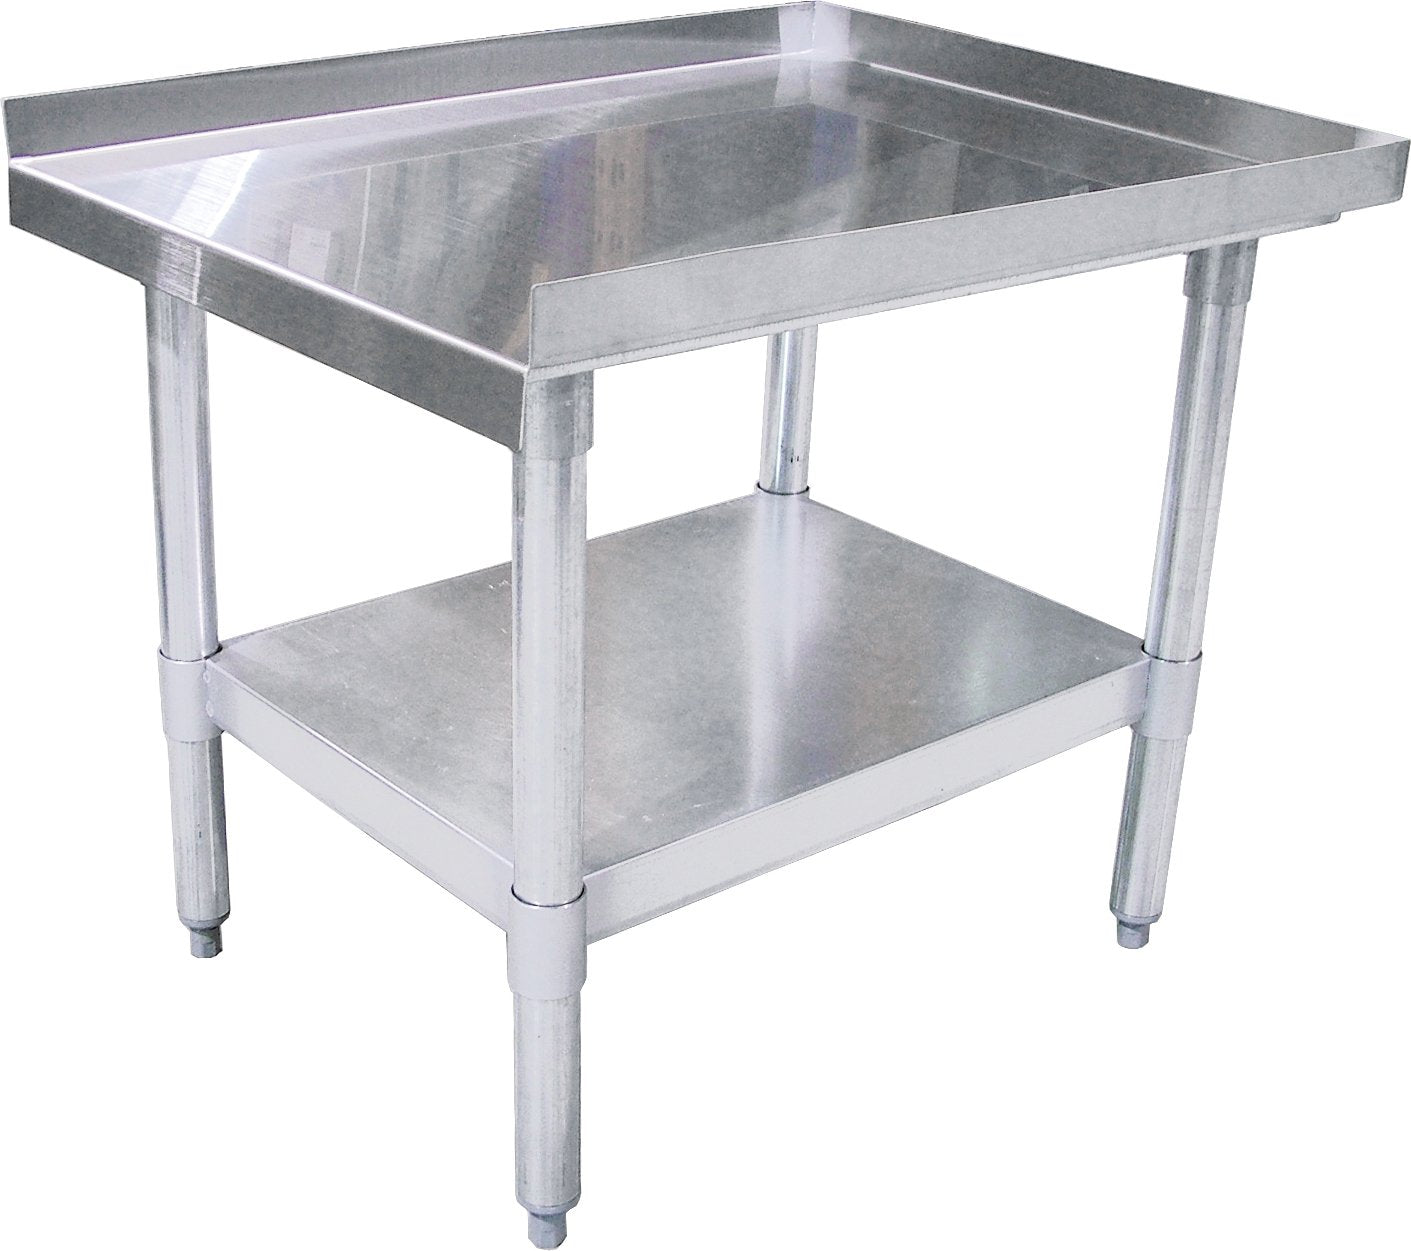 Omcan - 30” x 30” Equipment Stand - 22058